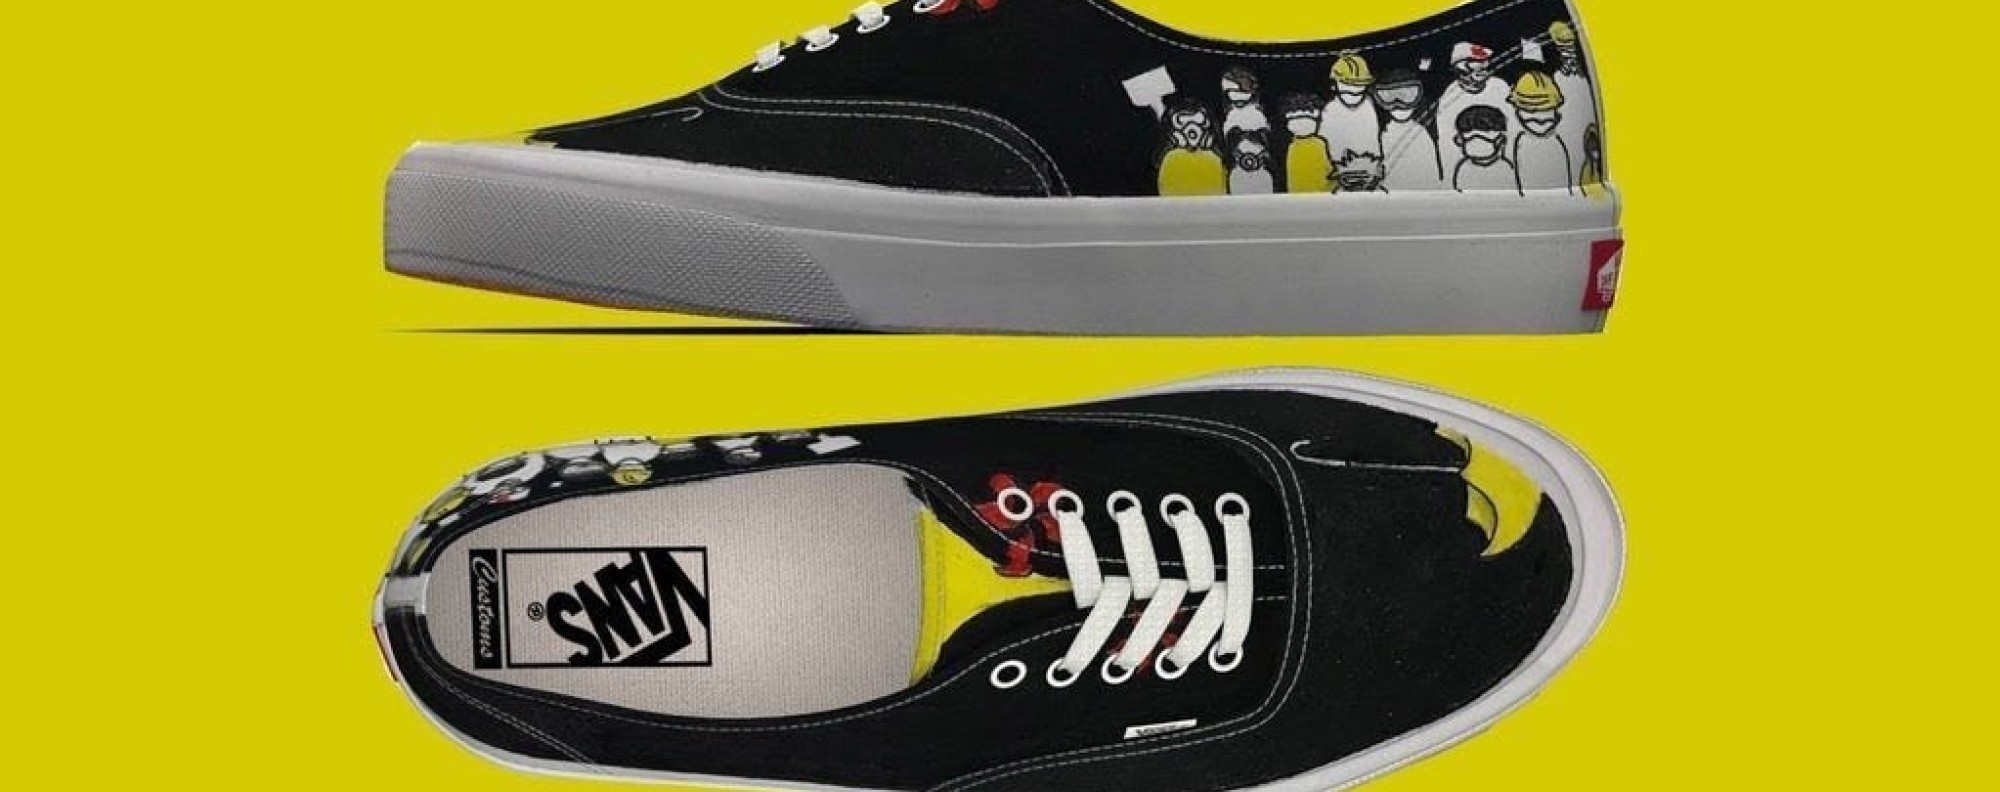 Vans sneakers pulled from sale in Hong Kong after protest-themed shoe contest designs removed by company, sparking backlash | China Morning Post